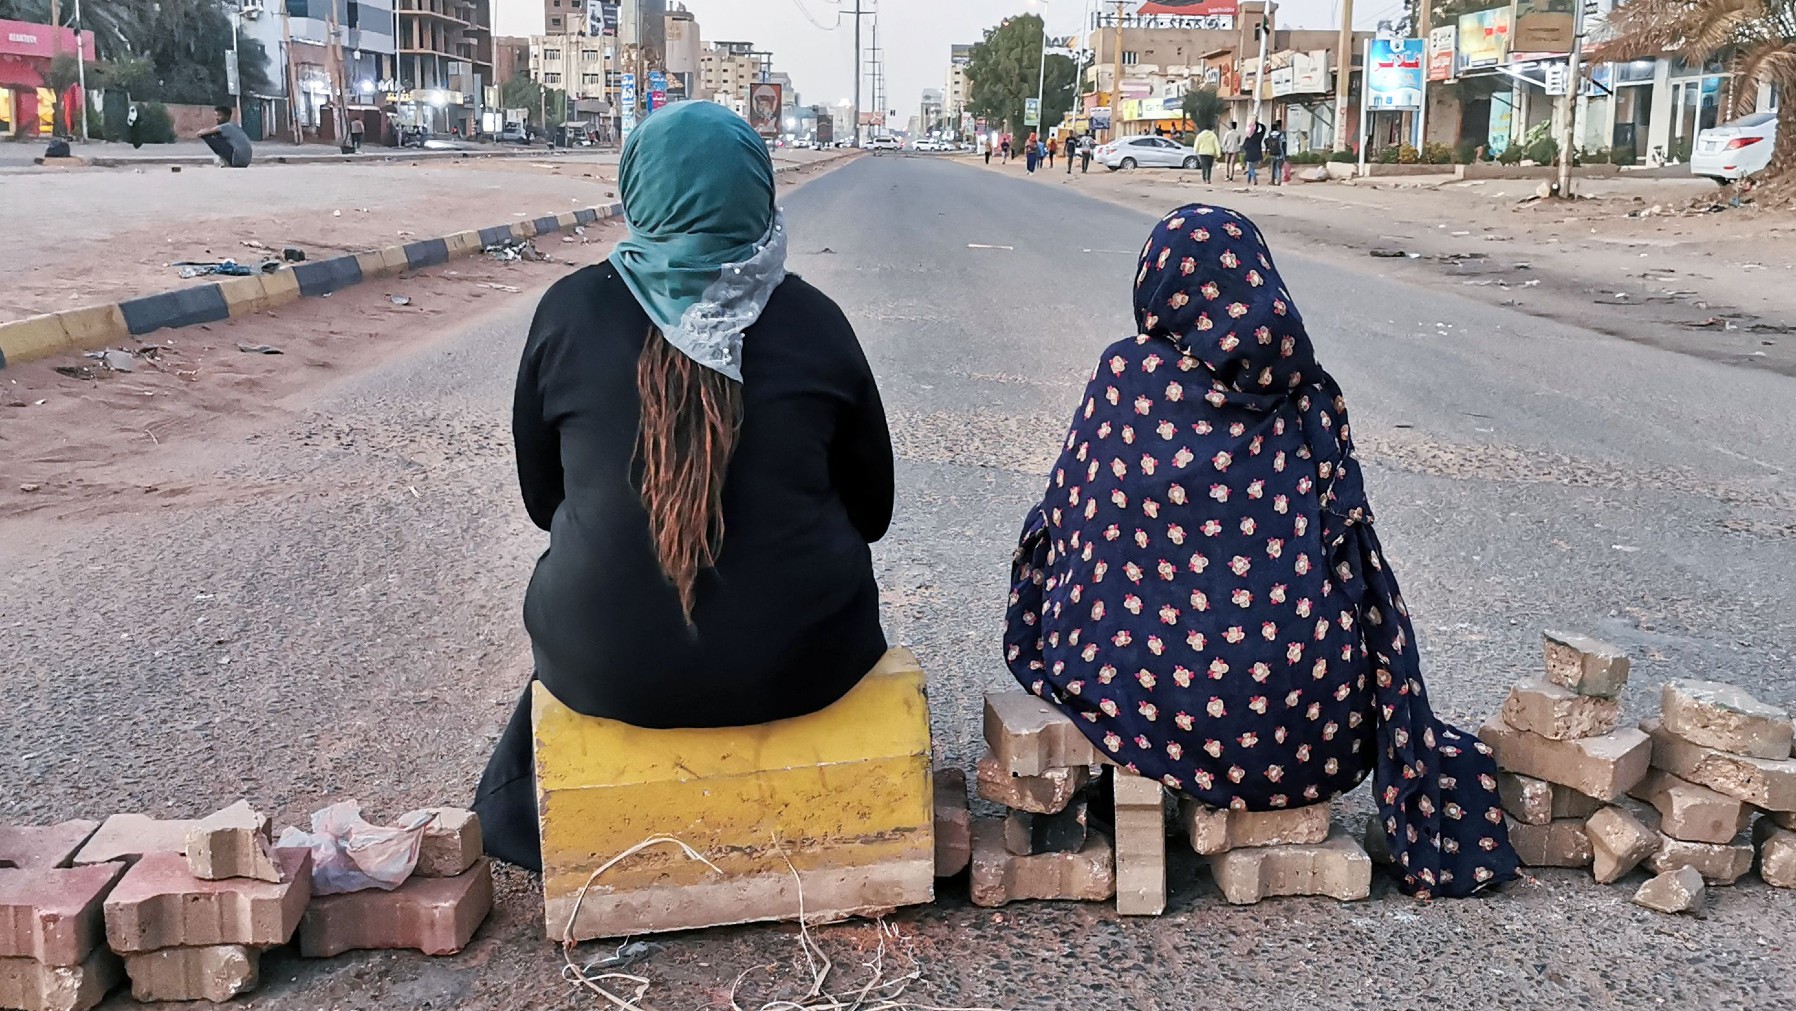 Sudanese women sit on a brick barricade in Khartoum during a demonstration earlier this year 